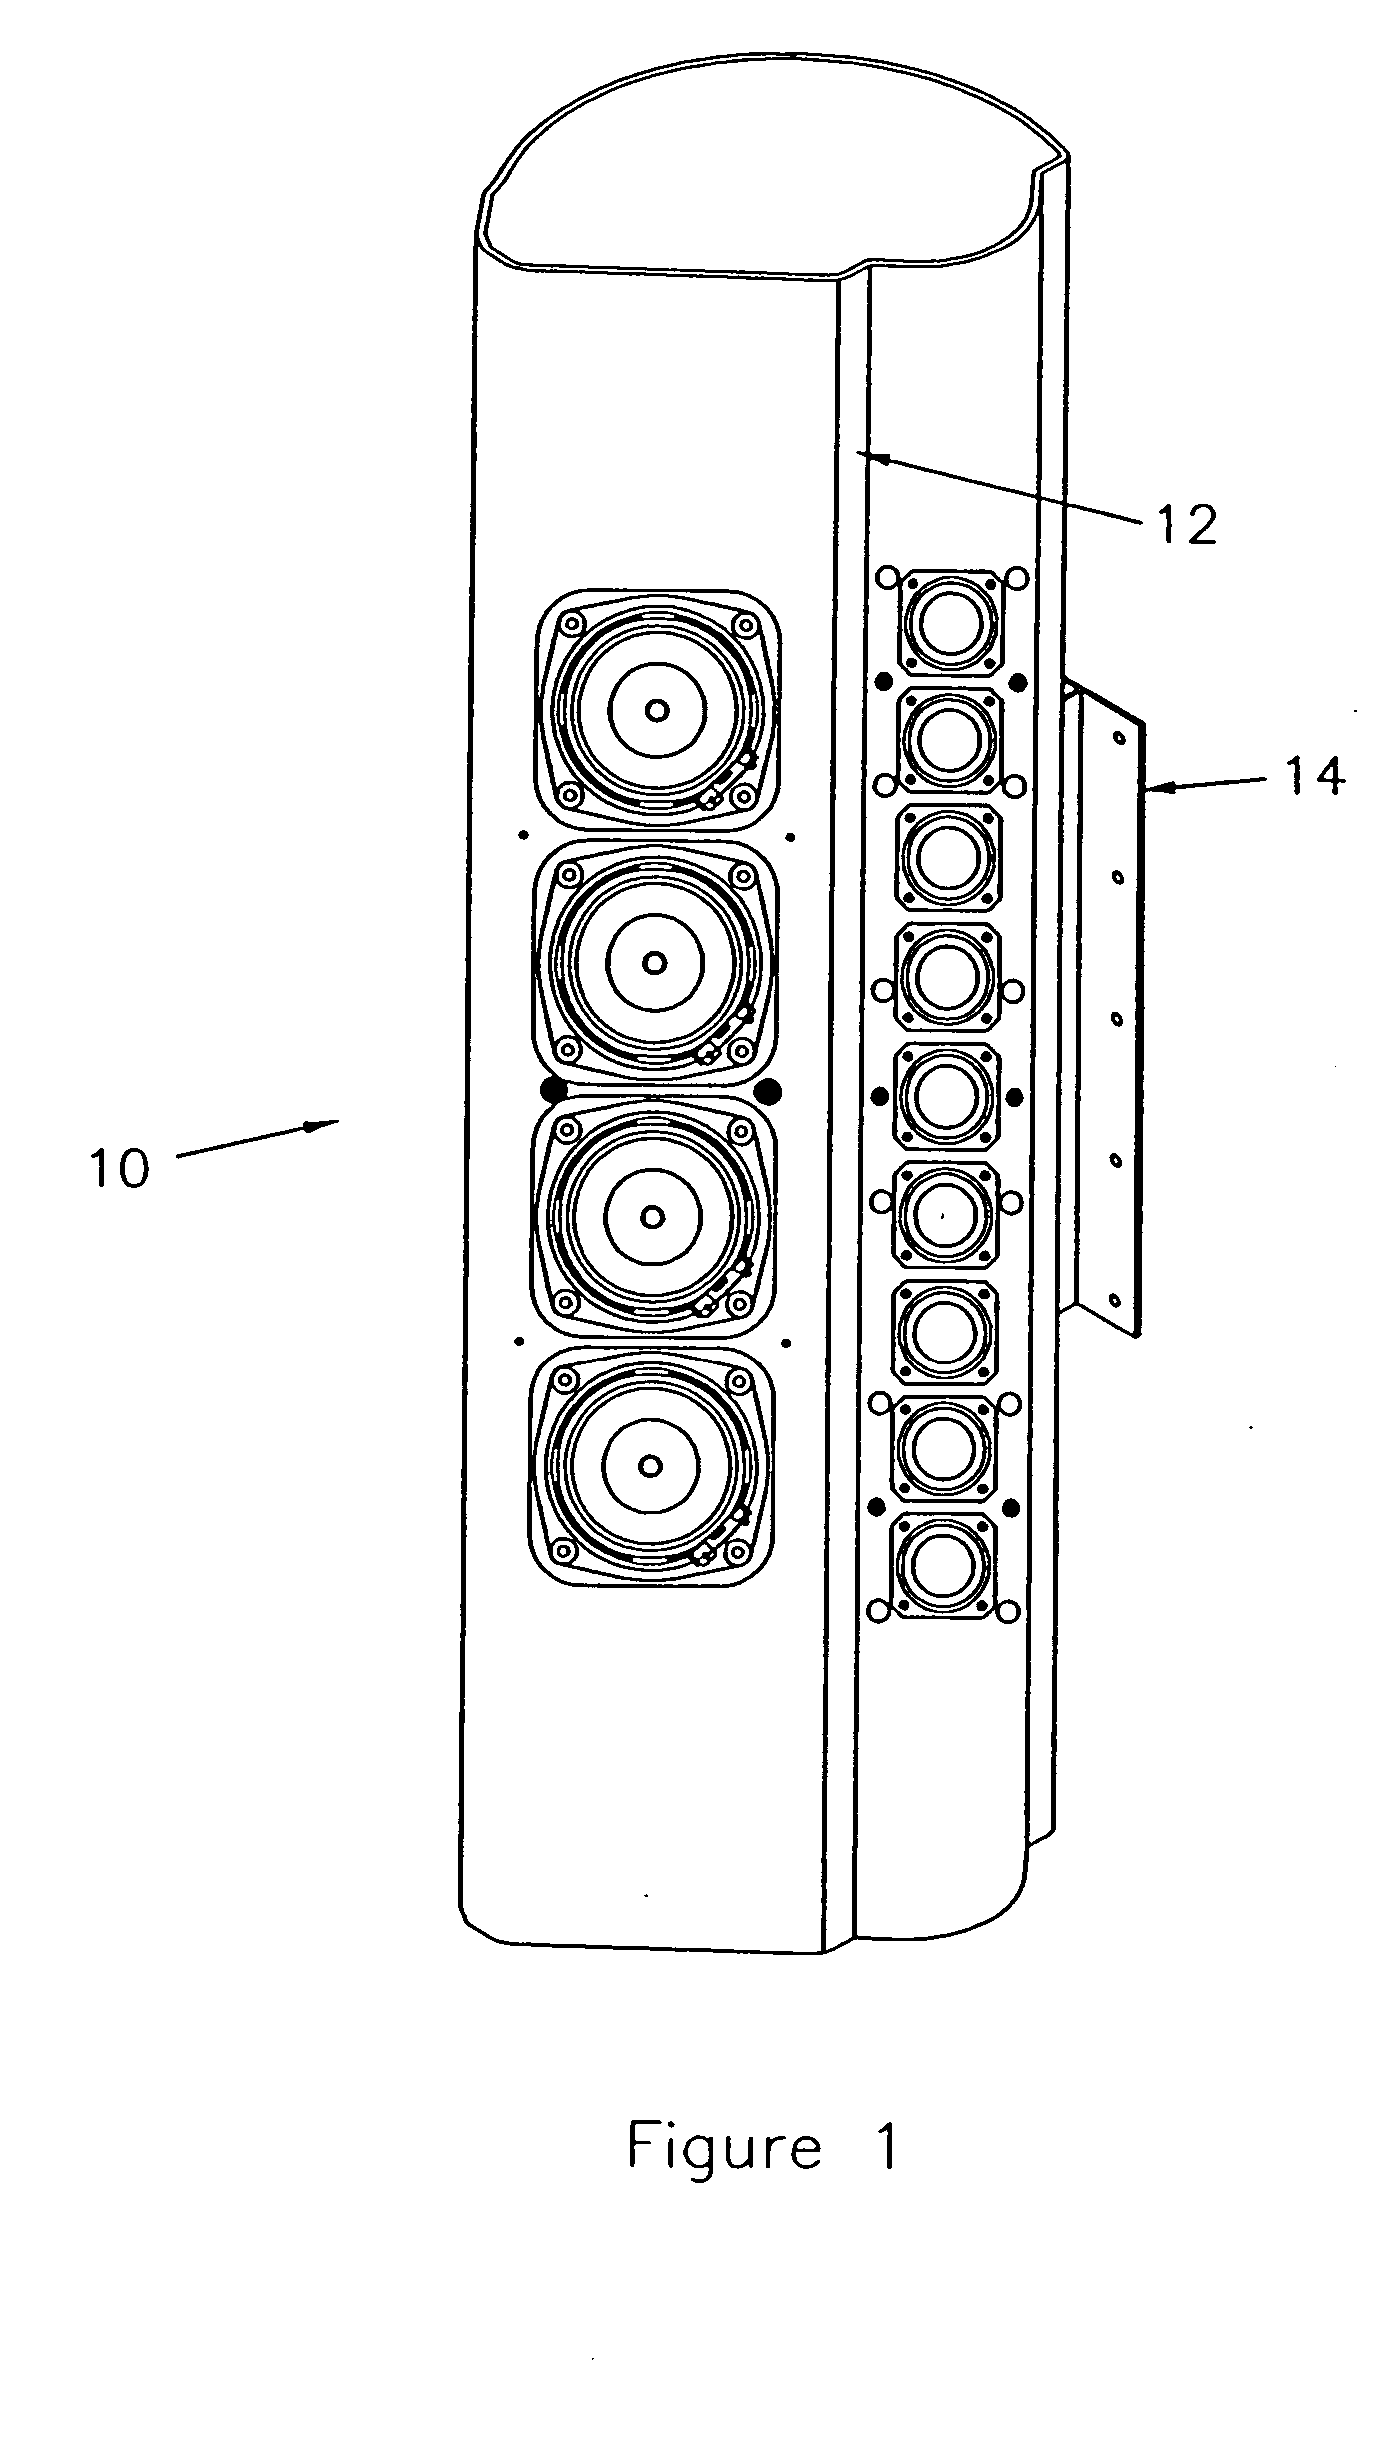 Apparatus and method for a speaker mounting system including a lightpipe and a rotating base stand